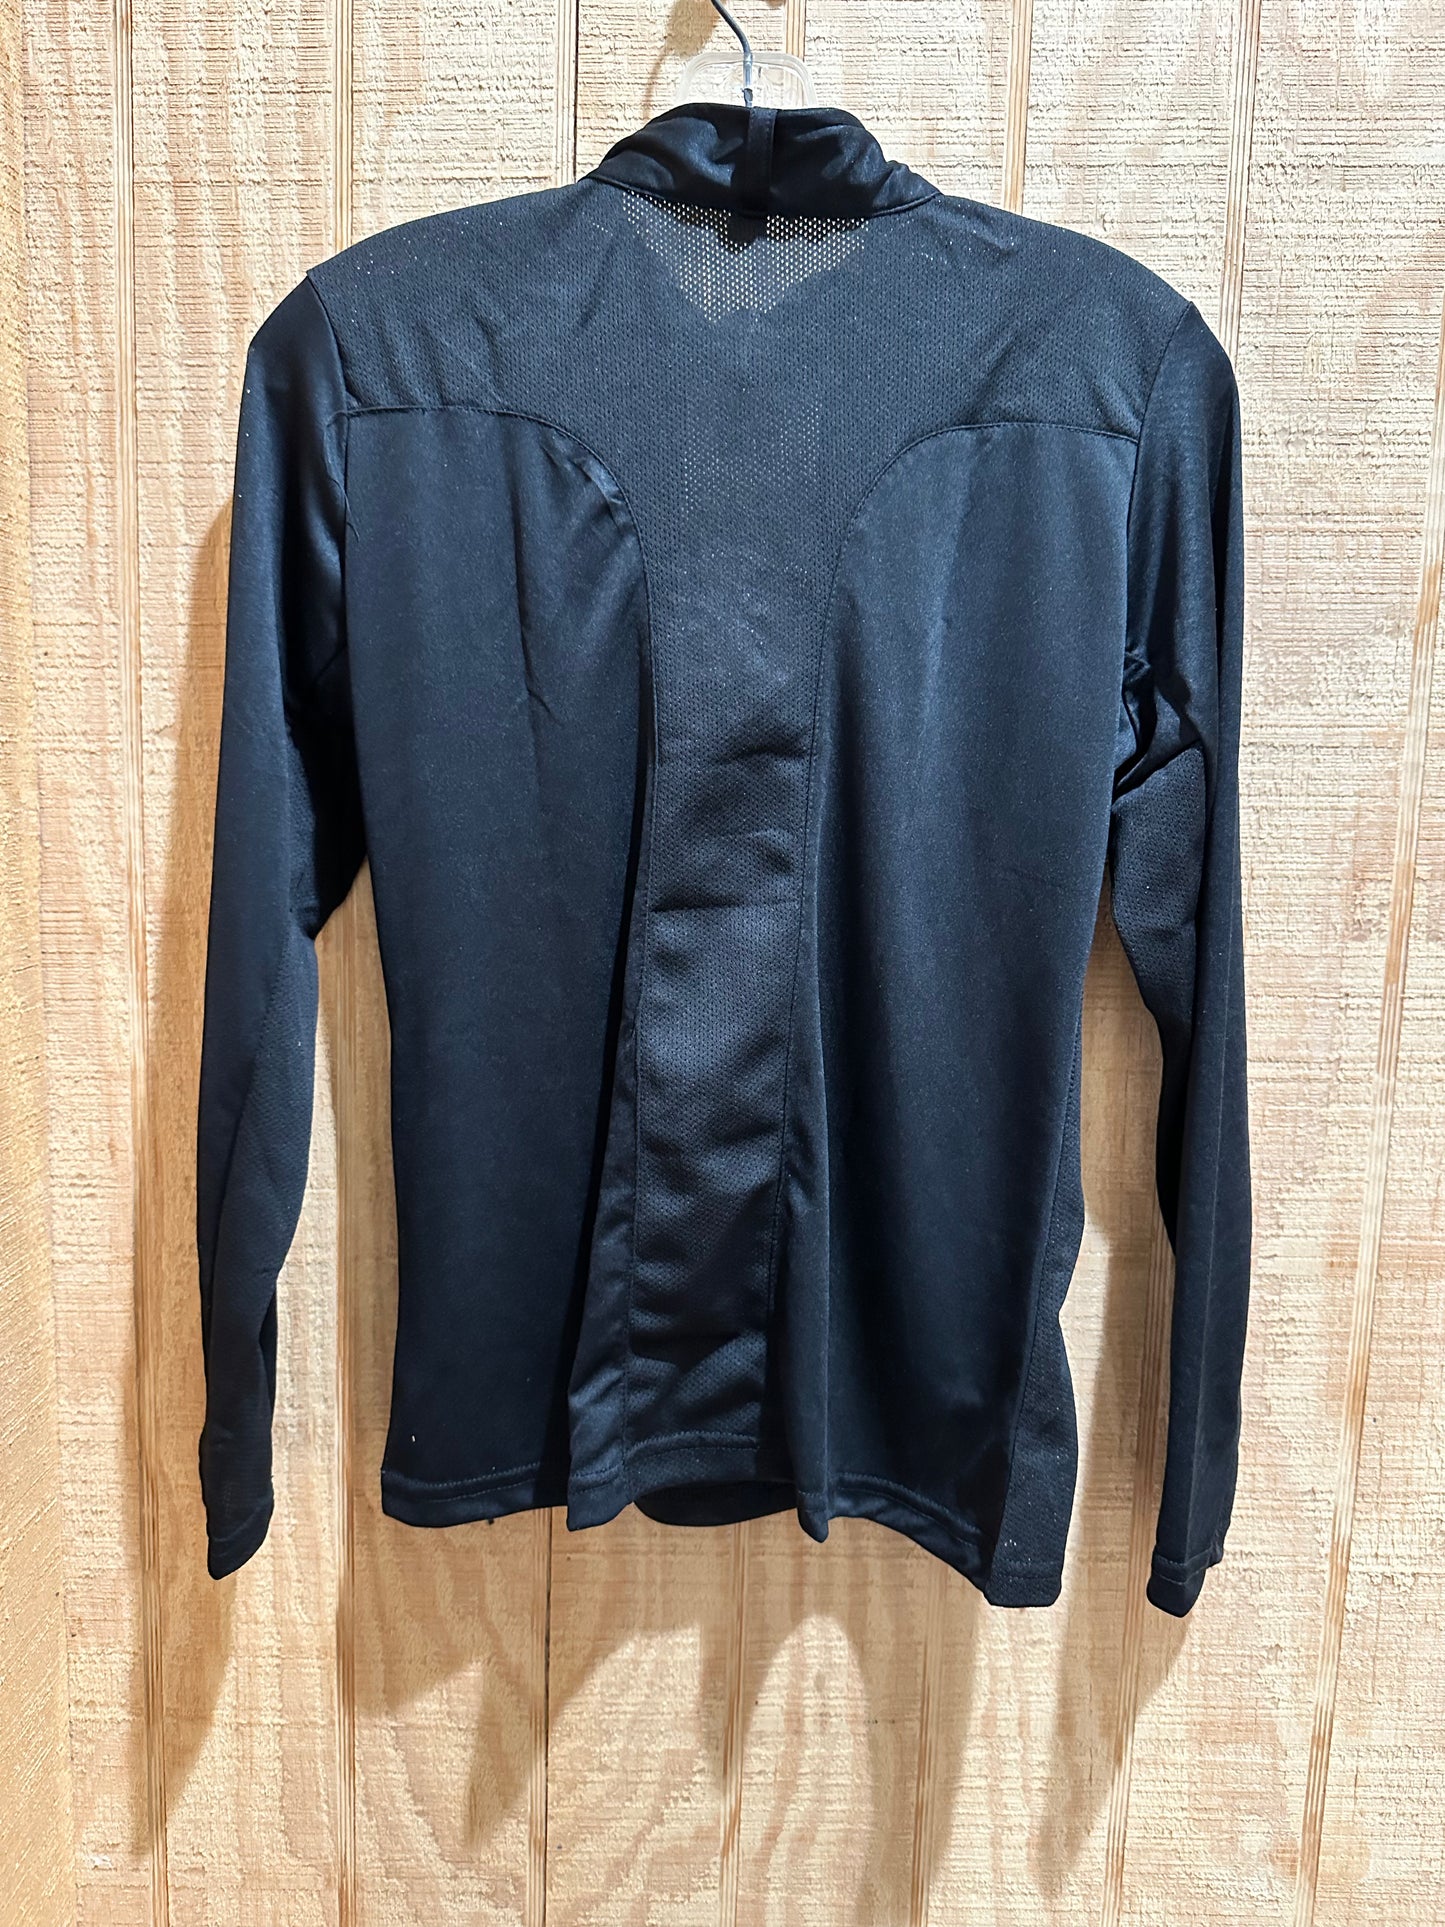 black long sleeve riding shirt with the back of the shirt facing out against light colored wood 